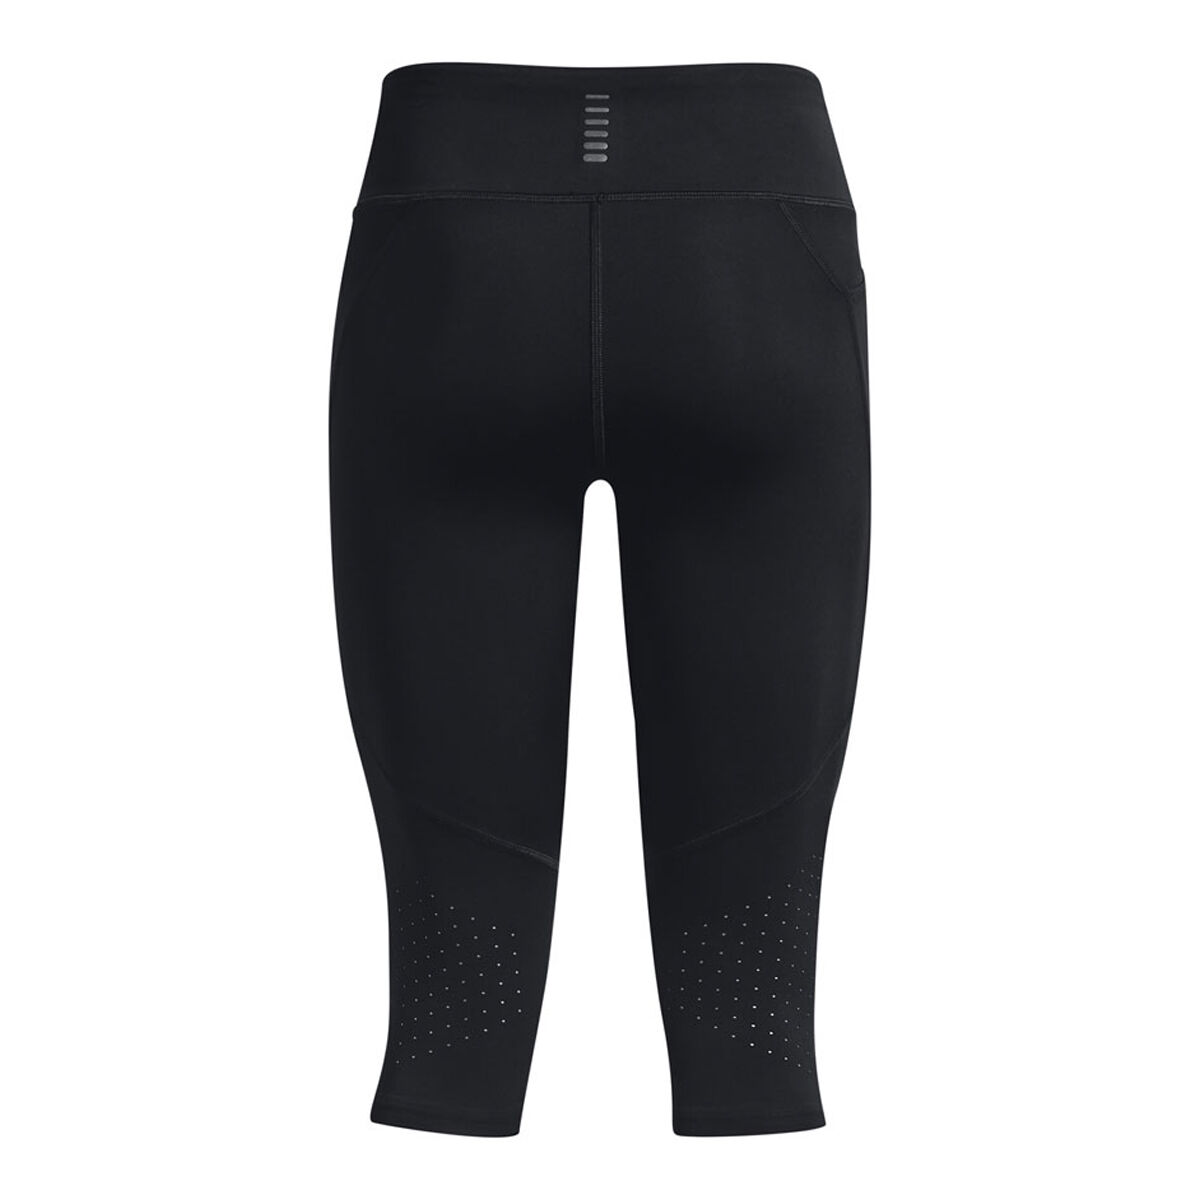 Under Armour Womens Fly Fast 3.0 Speed Capri Tights